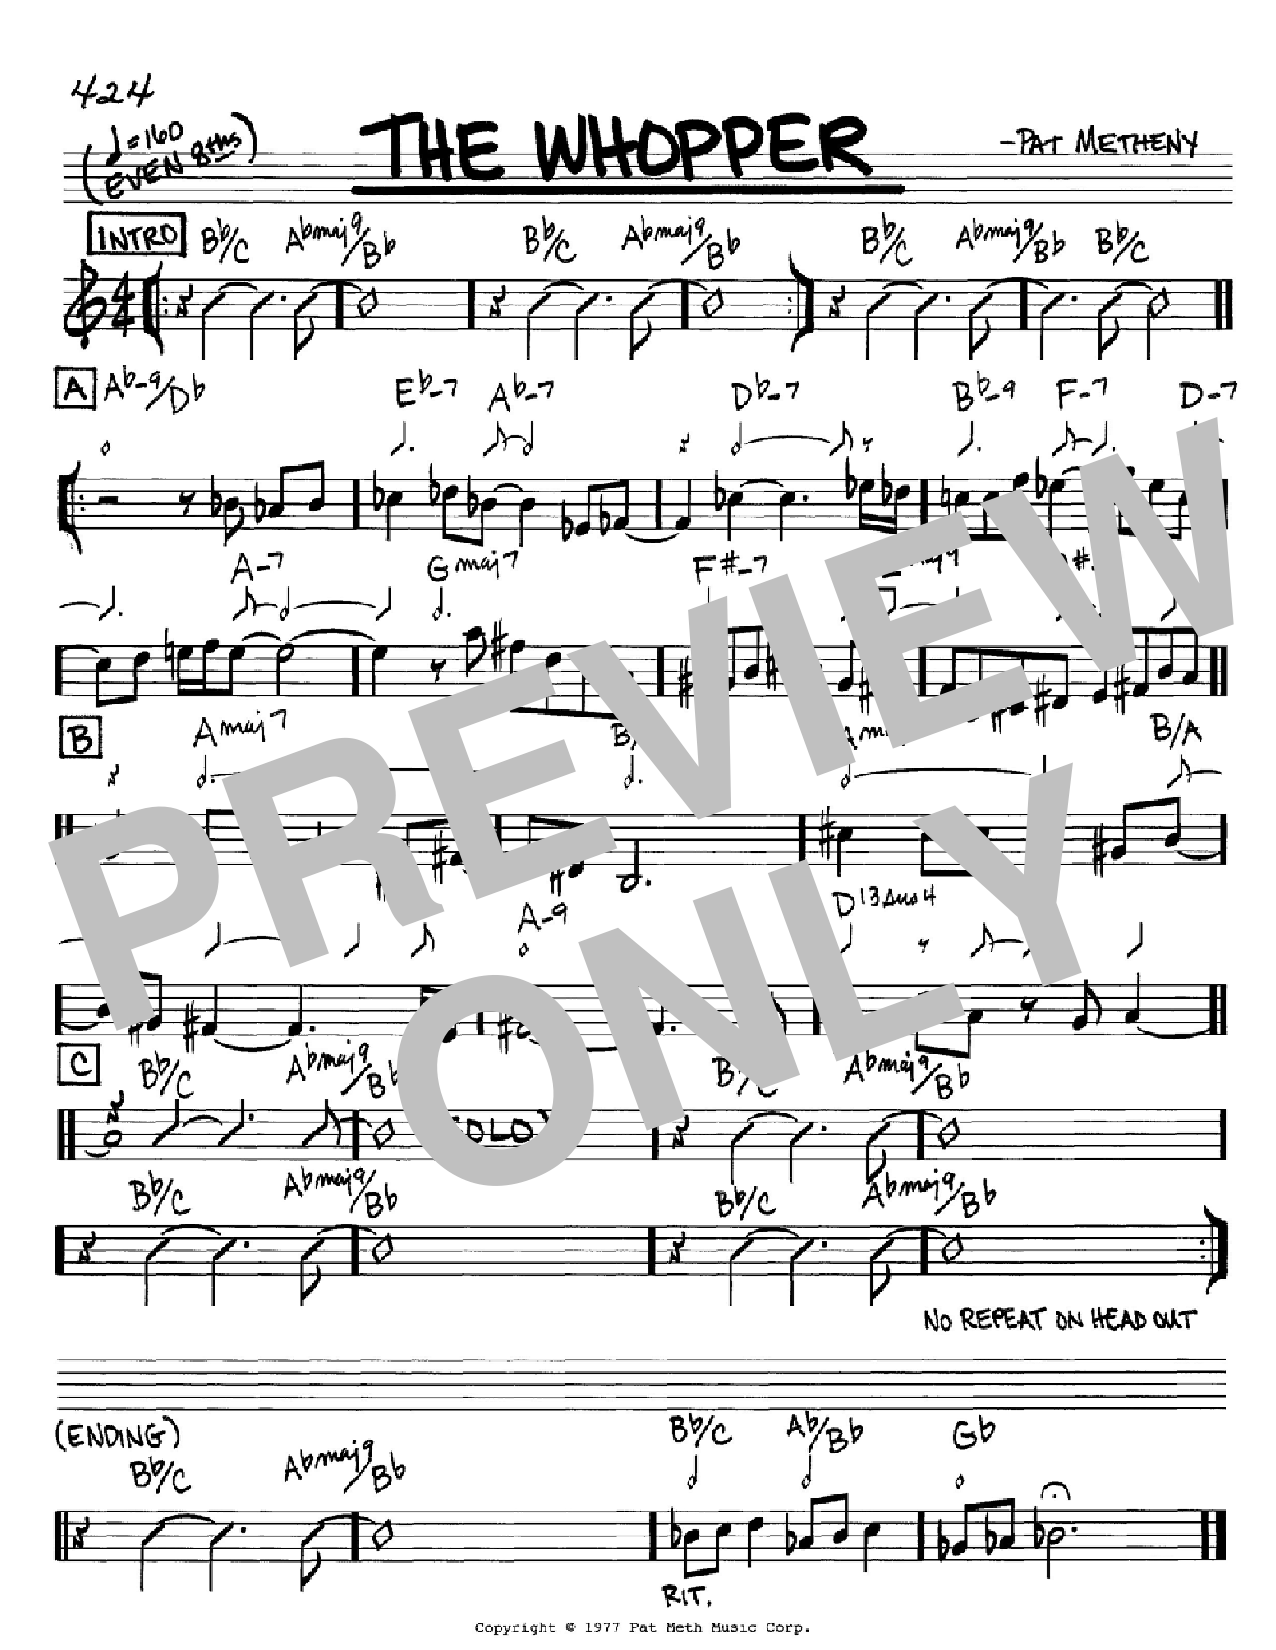 Download Pat Metheny The Whopper Sheet Music